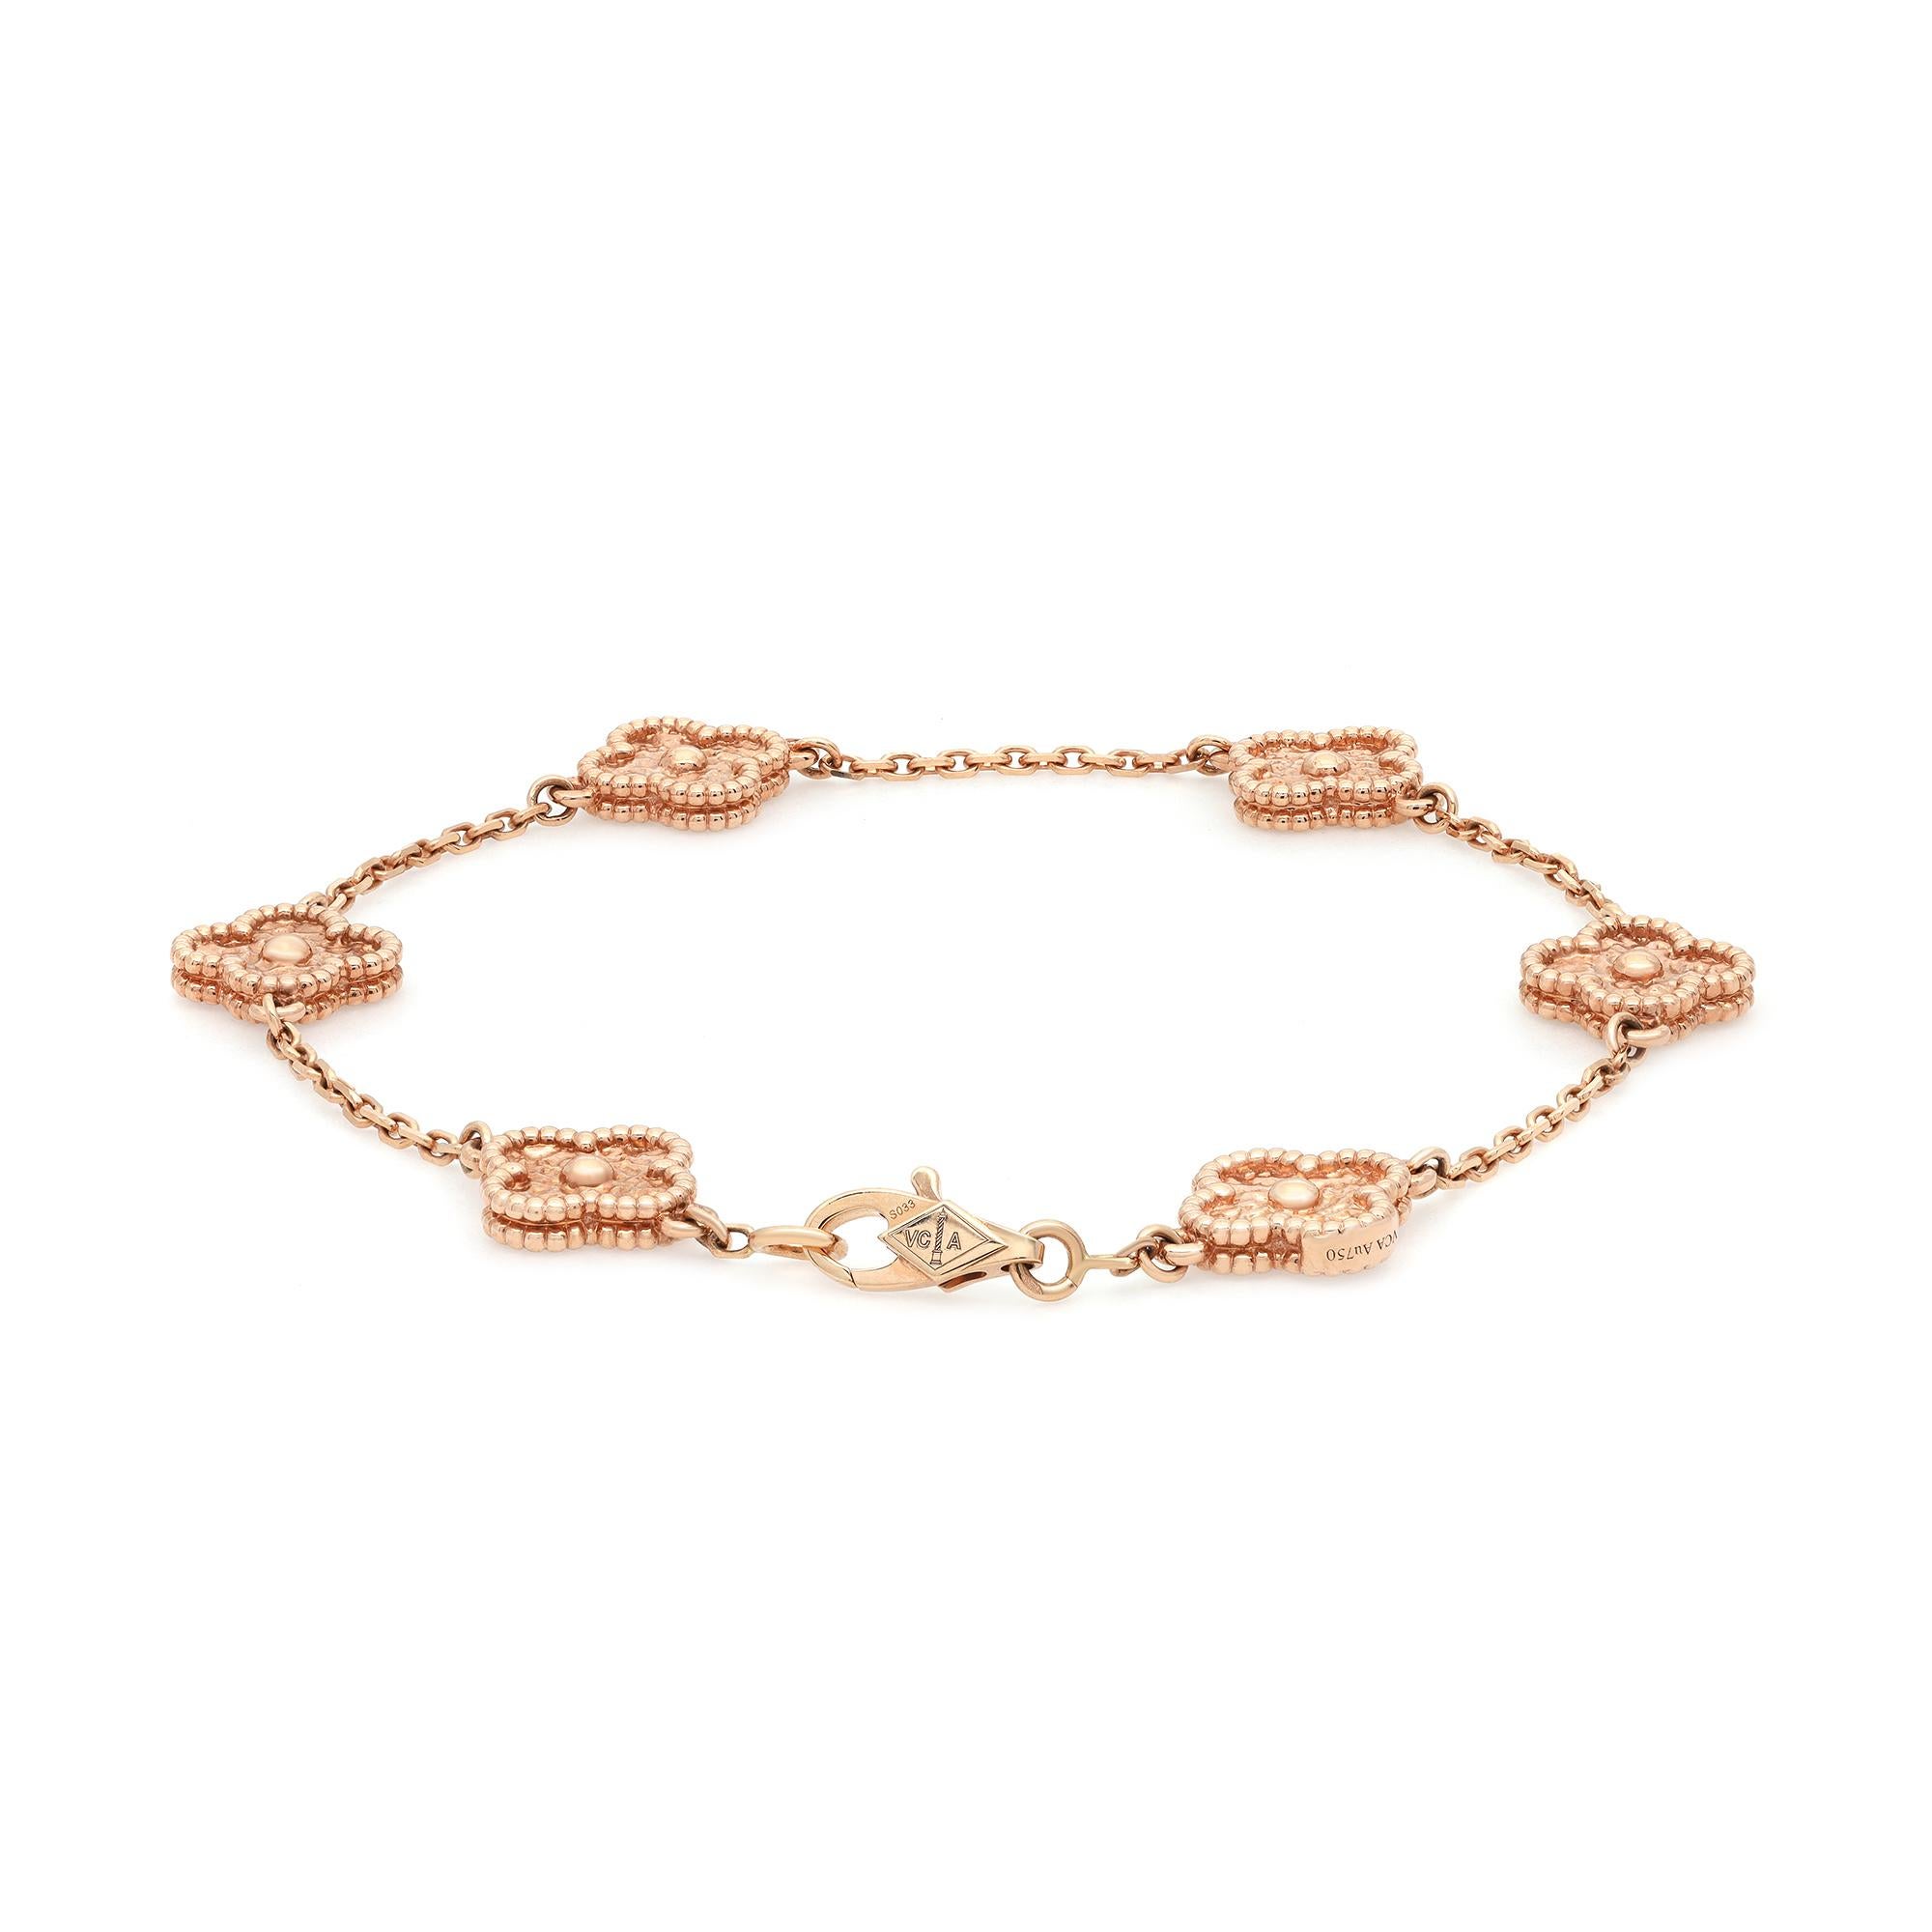 Light and delicate, this Sweet Alhambra bracelet by Van Cleef & Arpels features 6 delightful lucky motifs in miniature form. Crafted in fine 18k rose gold. Secured with hallmarked clasp. Bracelet length: 6.69 inches. Total weight: 7.5 grams.